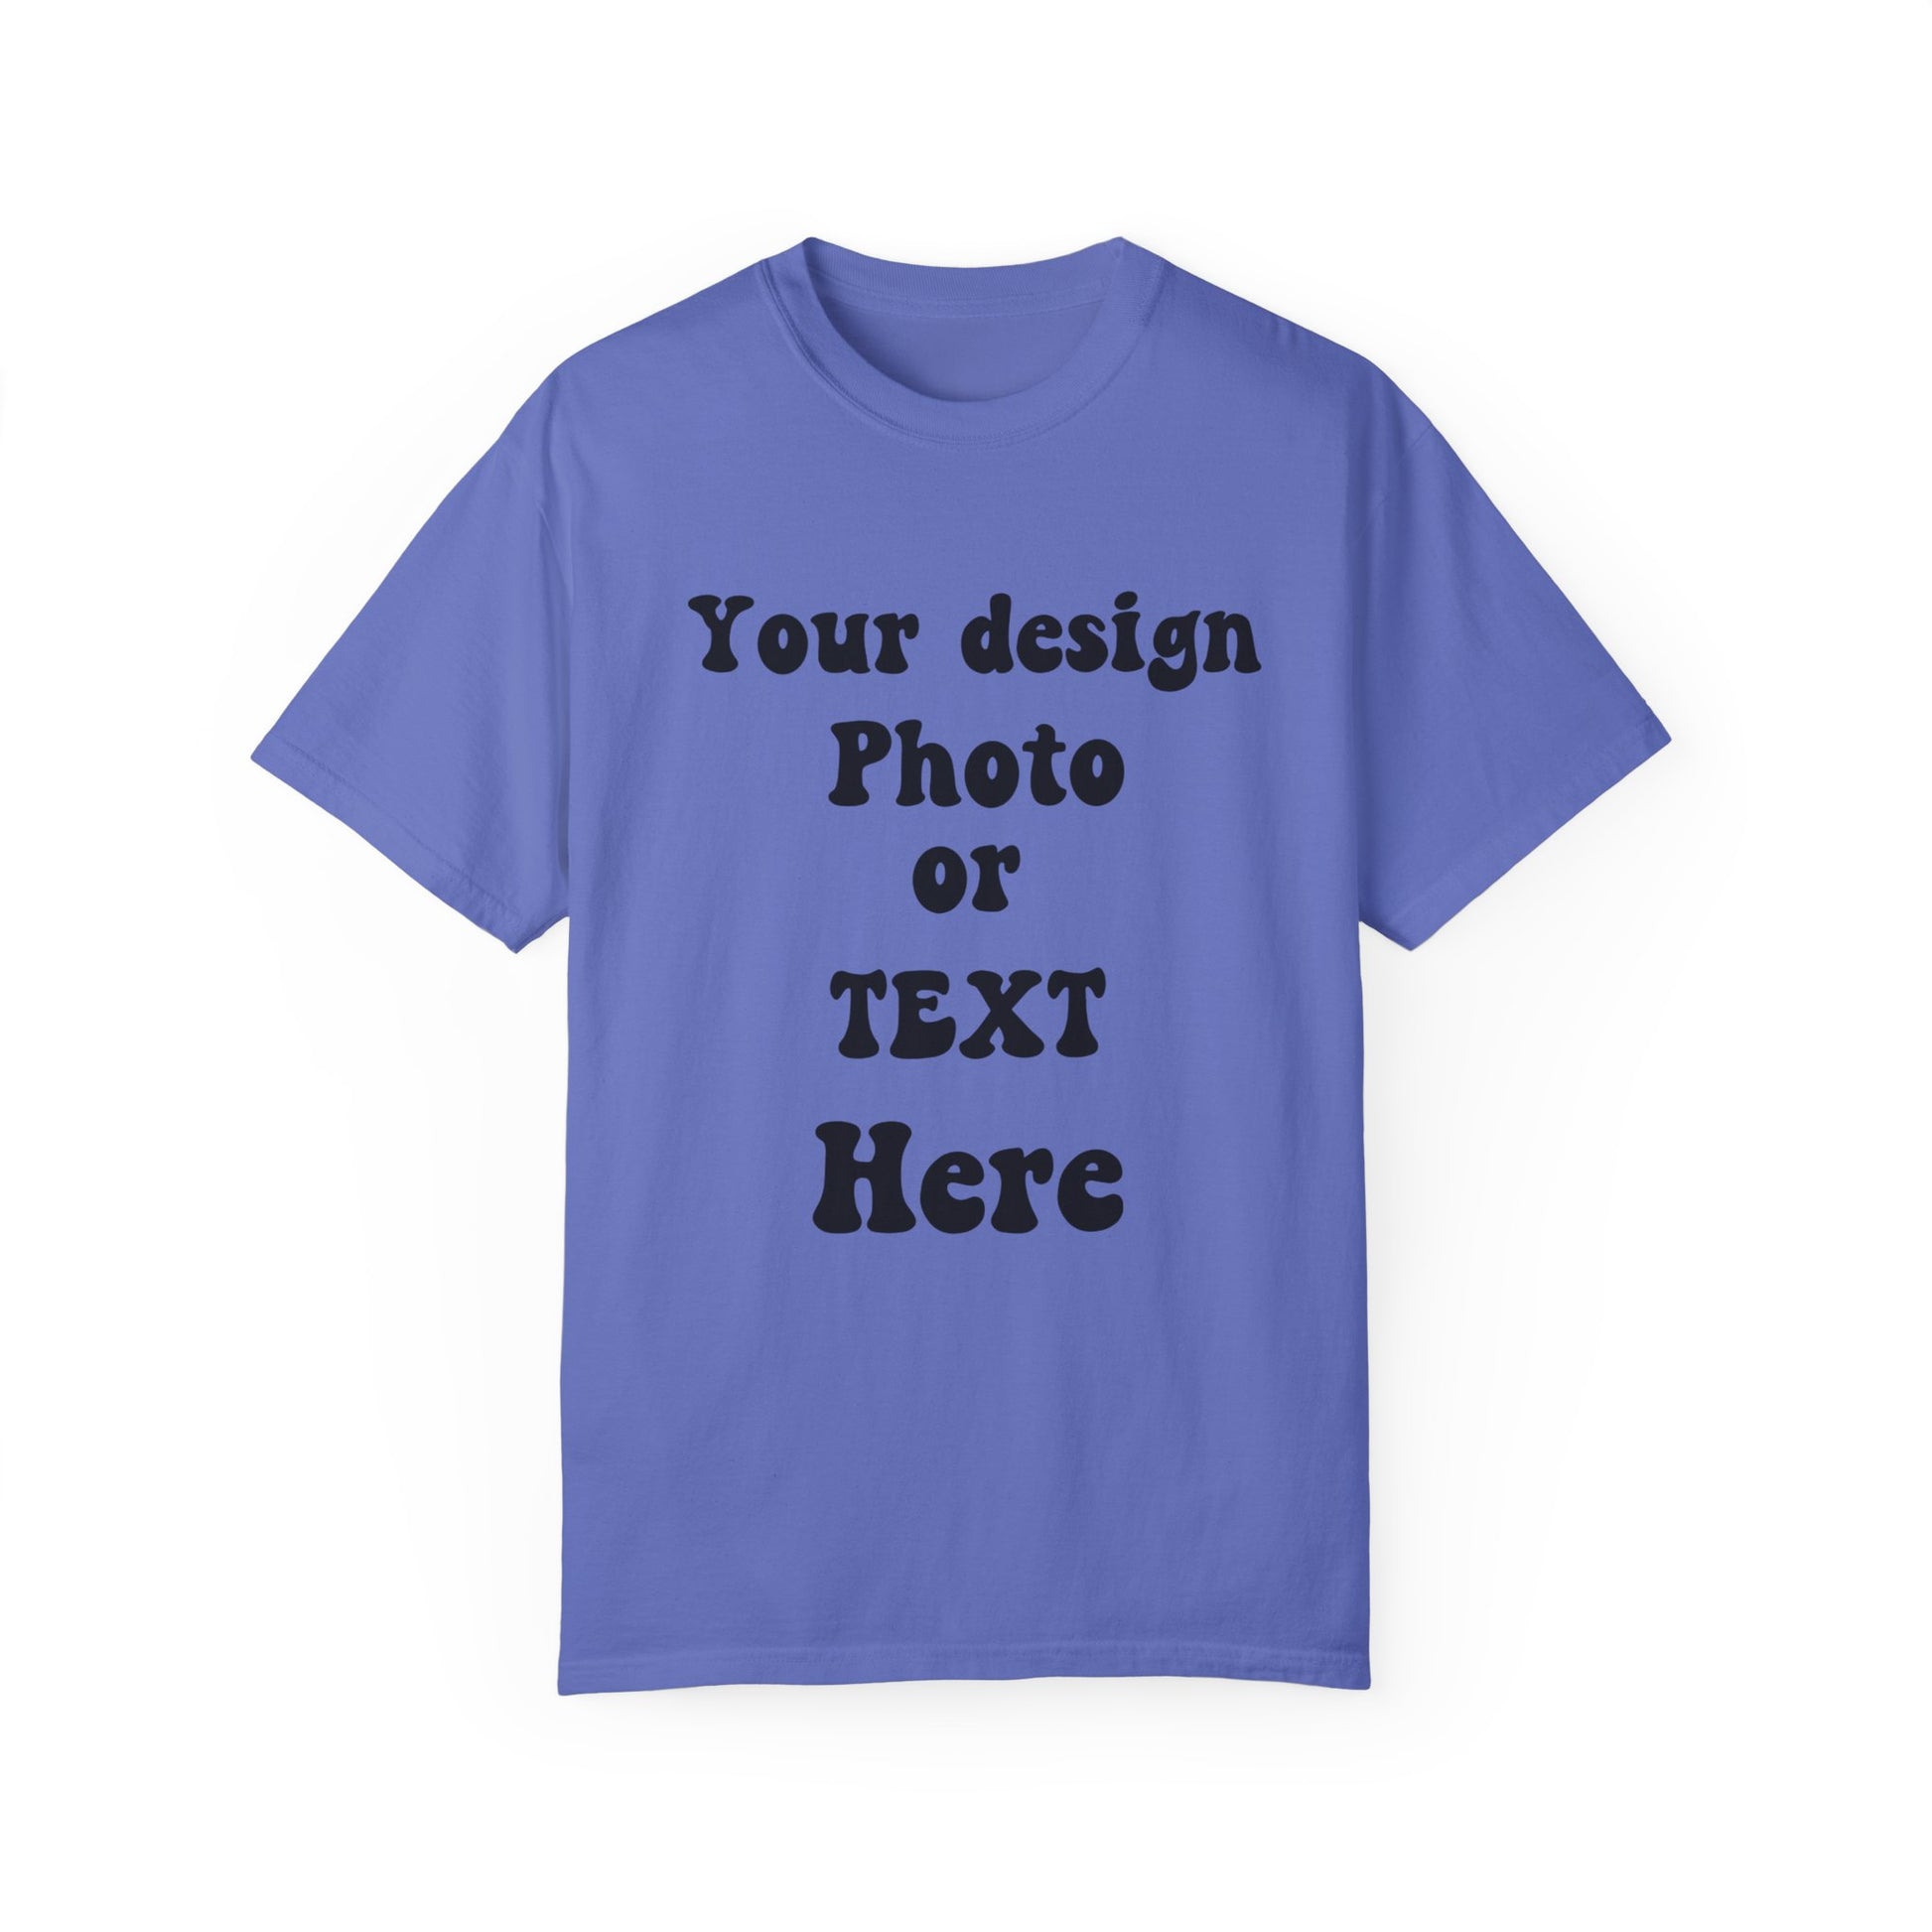 Personalized T-shirt with Your Own Design, Photo, Text - Made in USA and Australia 100% Cotton T-Shirt   